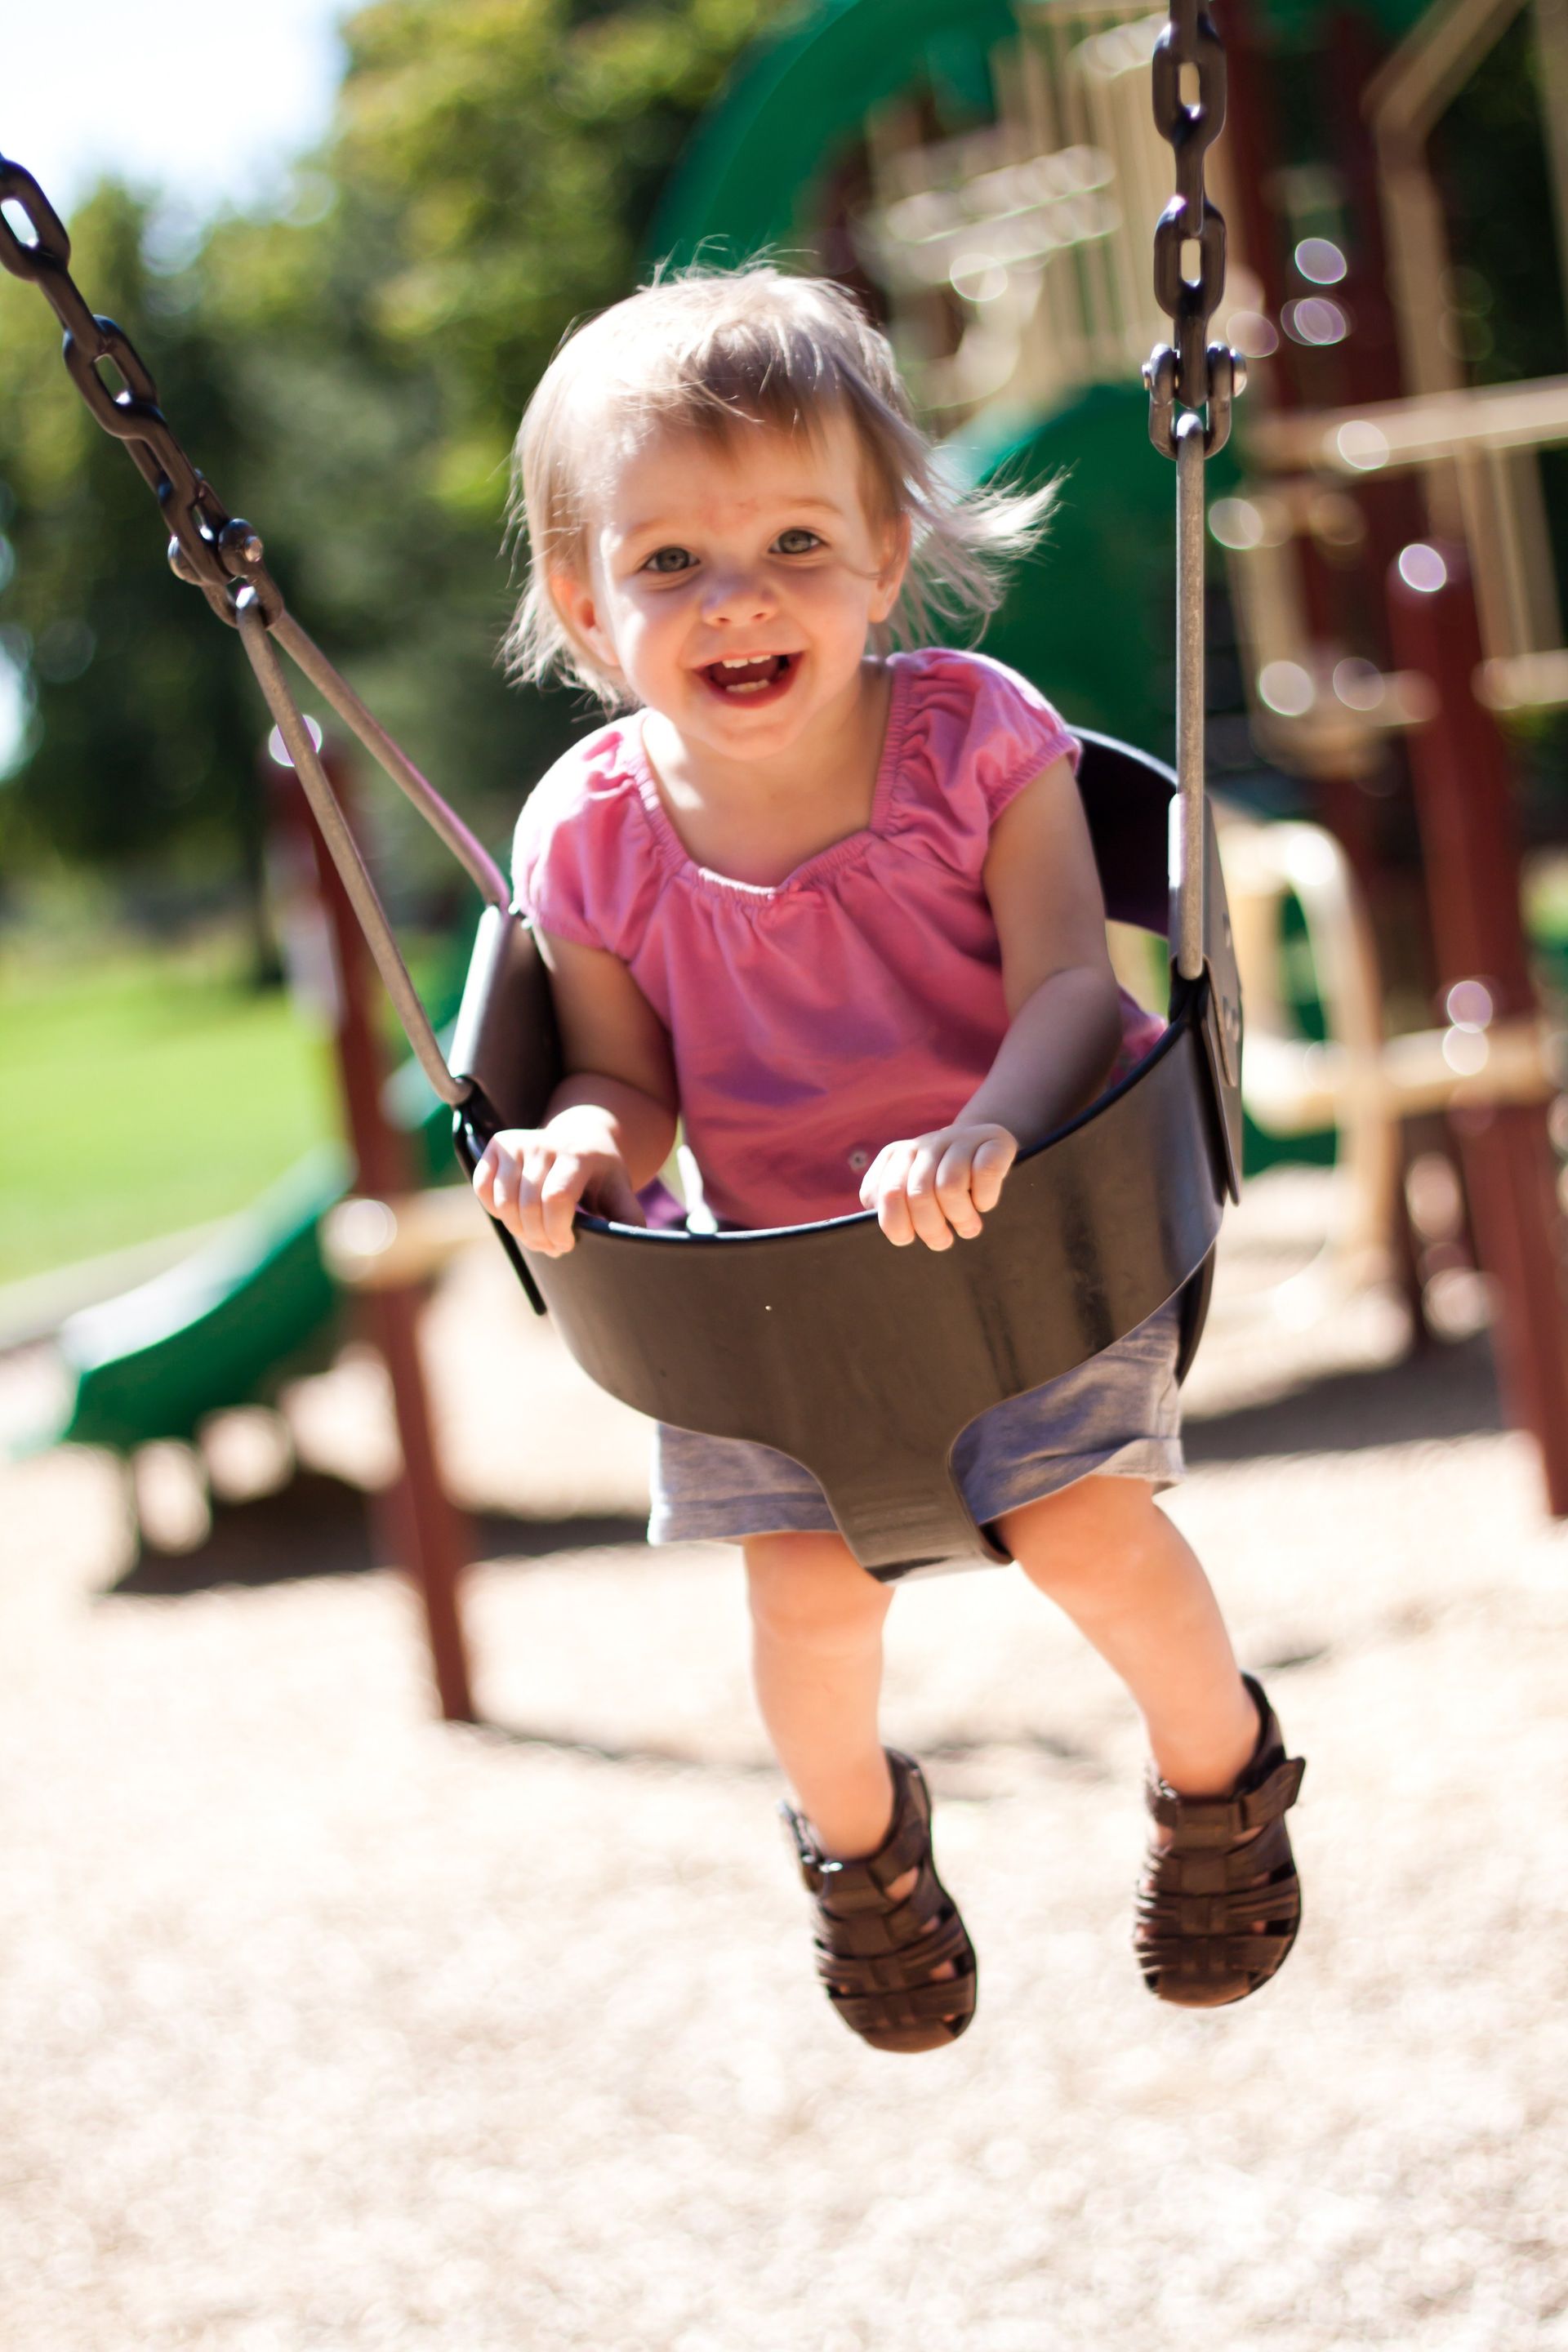 A young toddler swinging.